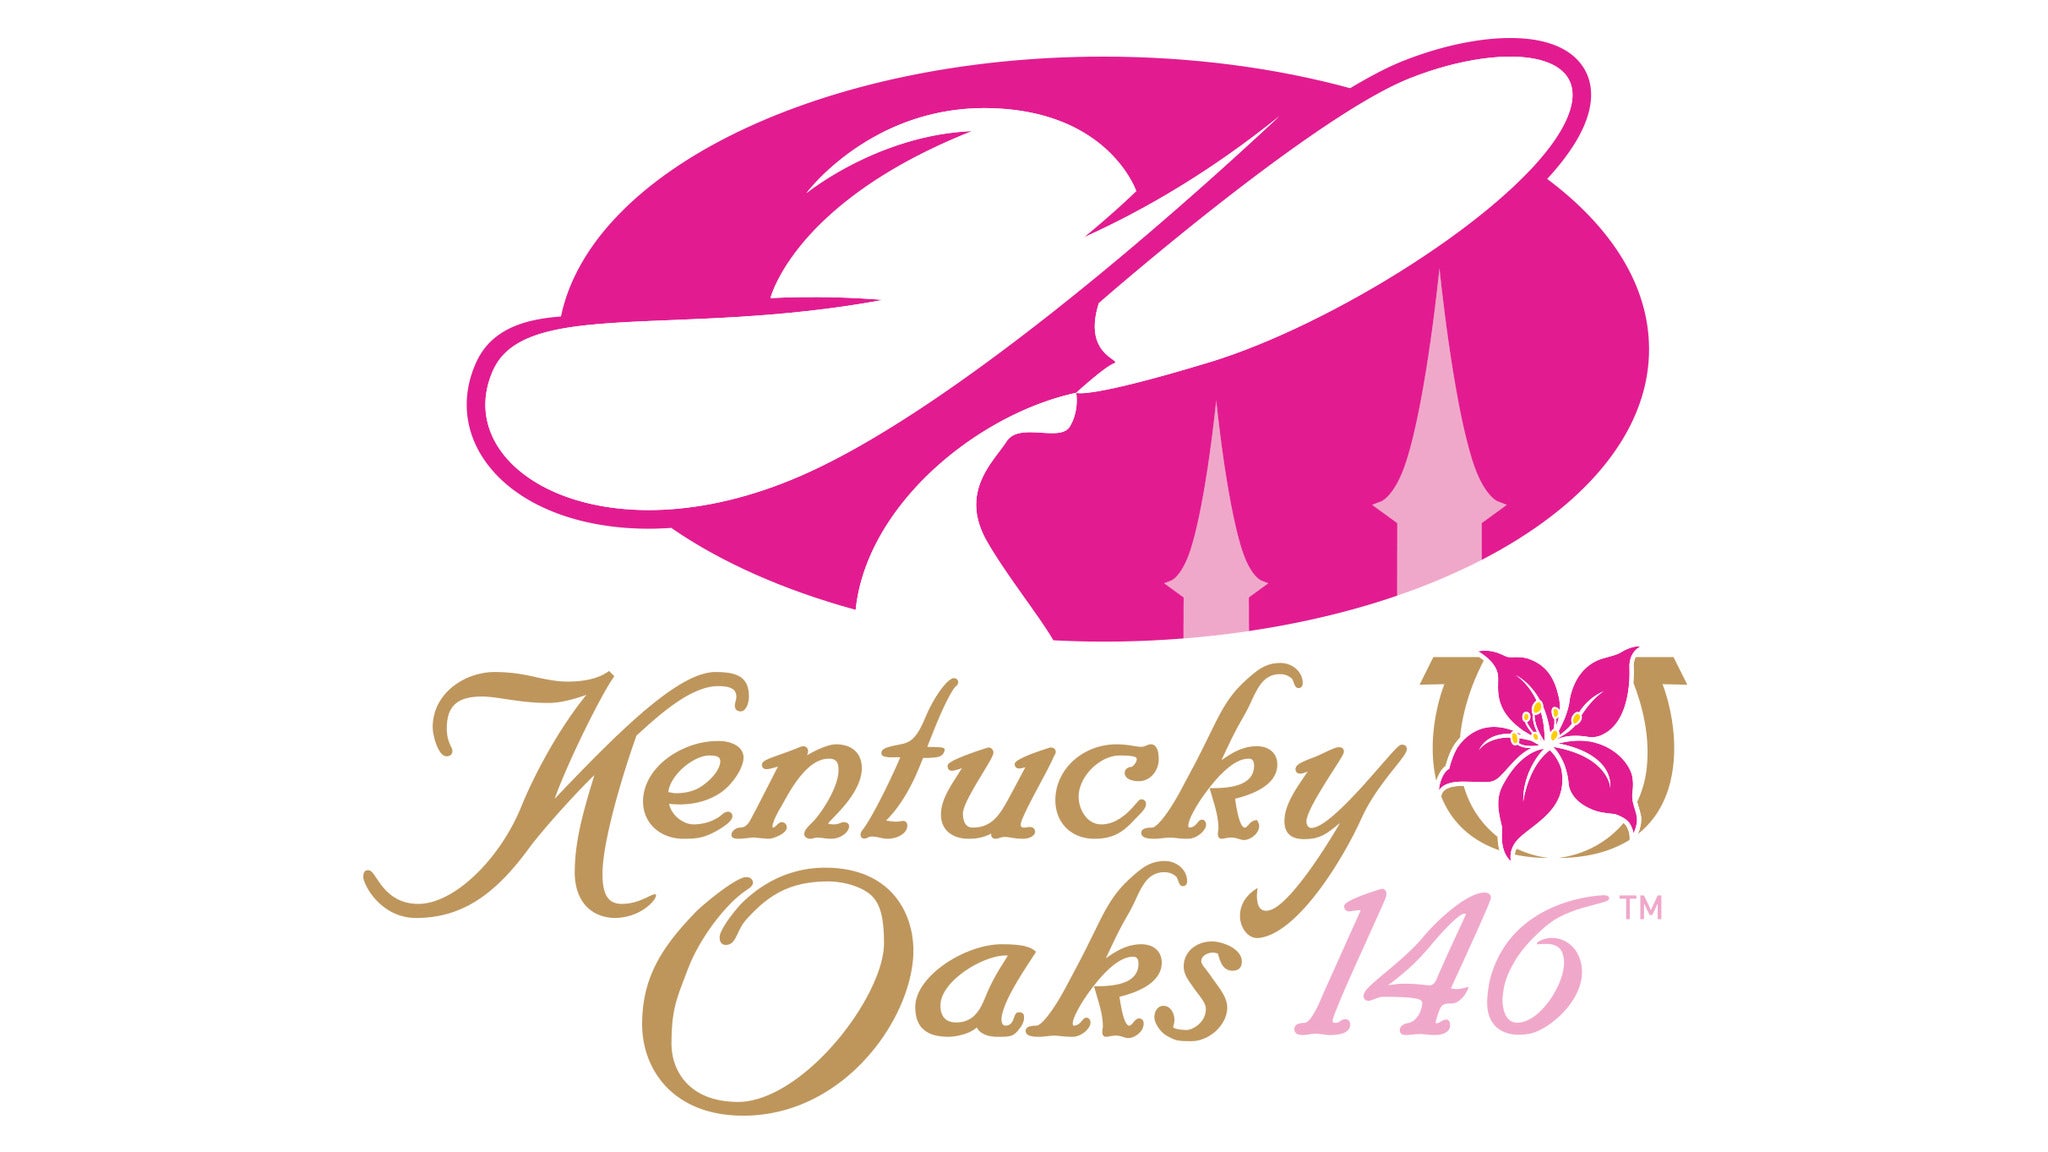 143rd Kentucky Oaks - Infield & Paddock General Admission Single Day in Louisville promo photo for Day of Race Purchase Pricing presale offer code